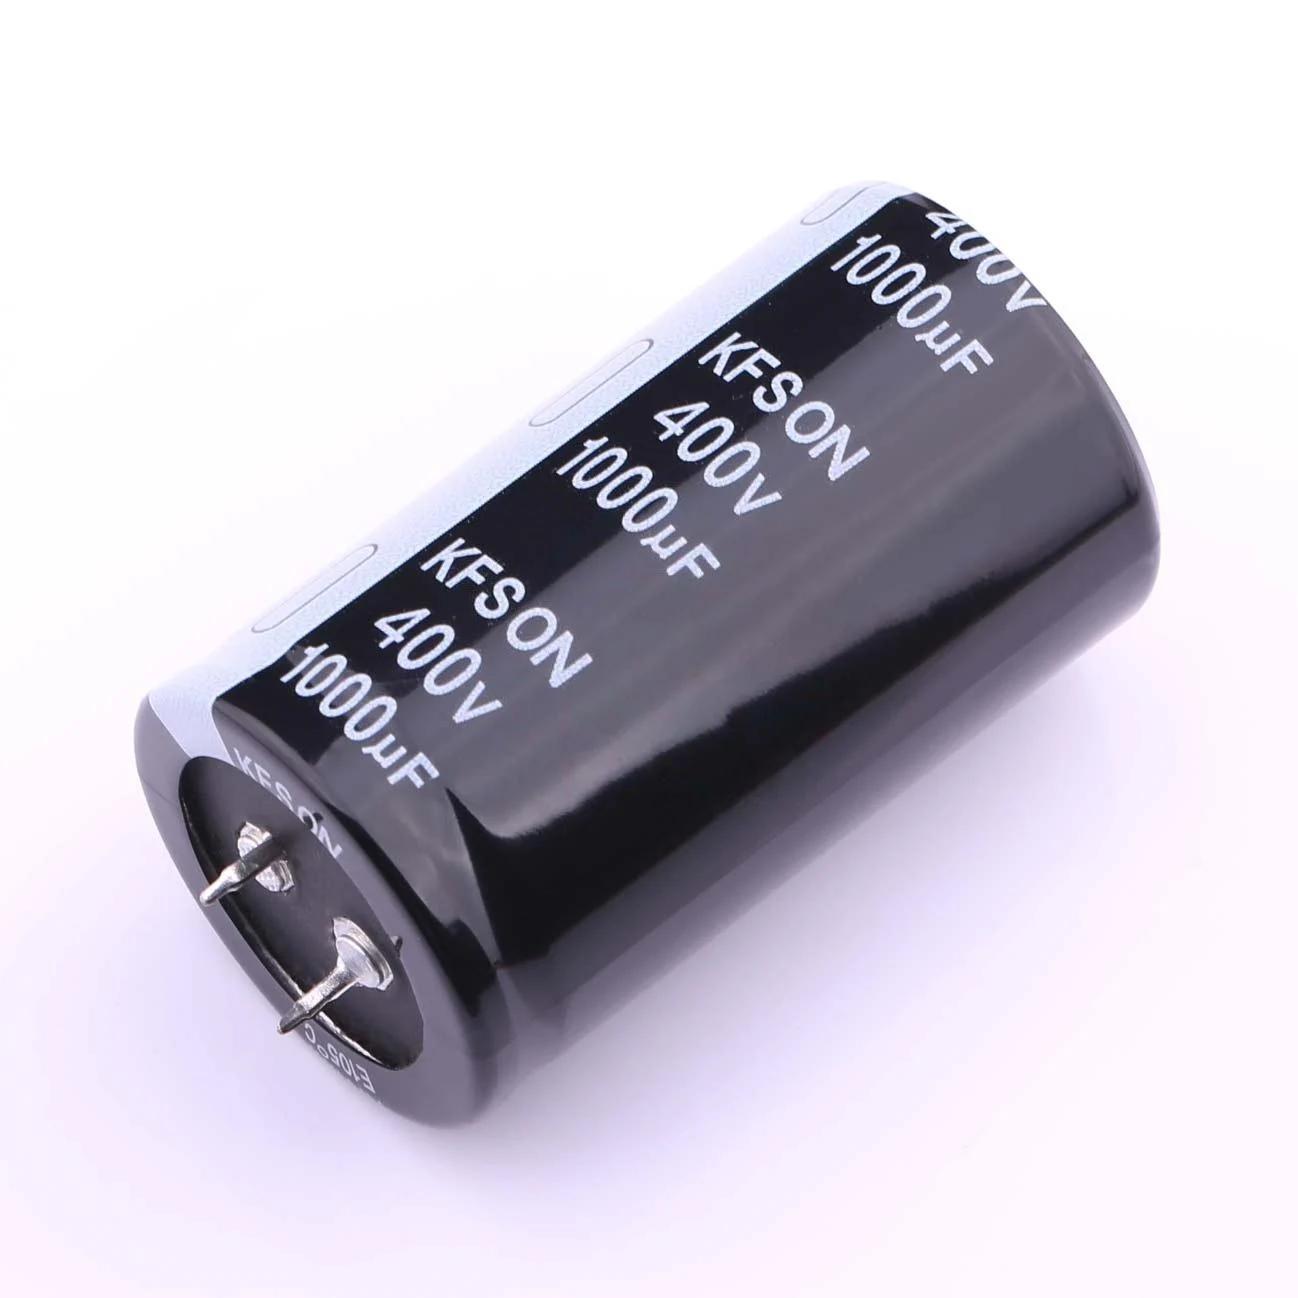 KN102M40035*60A (1000uF ±20% 400V) horn type electrolytic capacitor